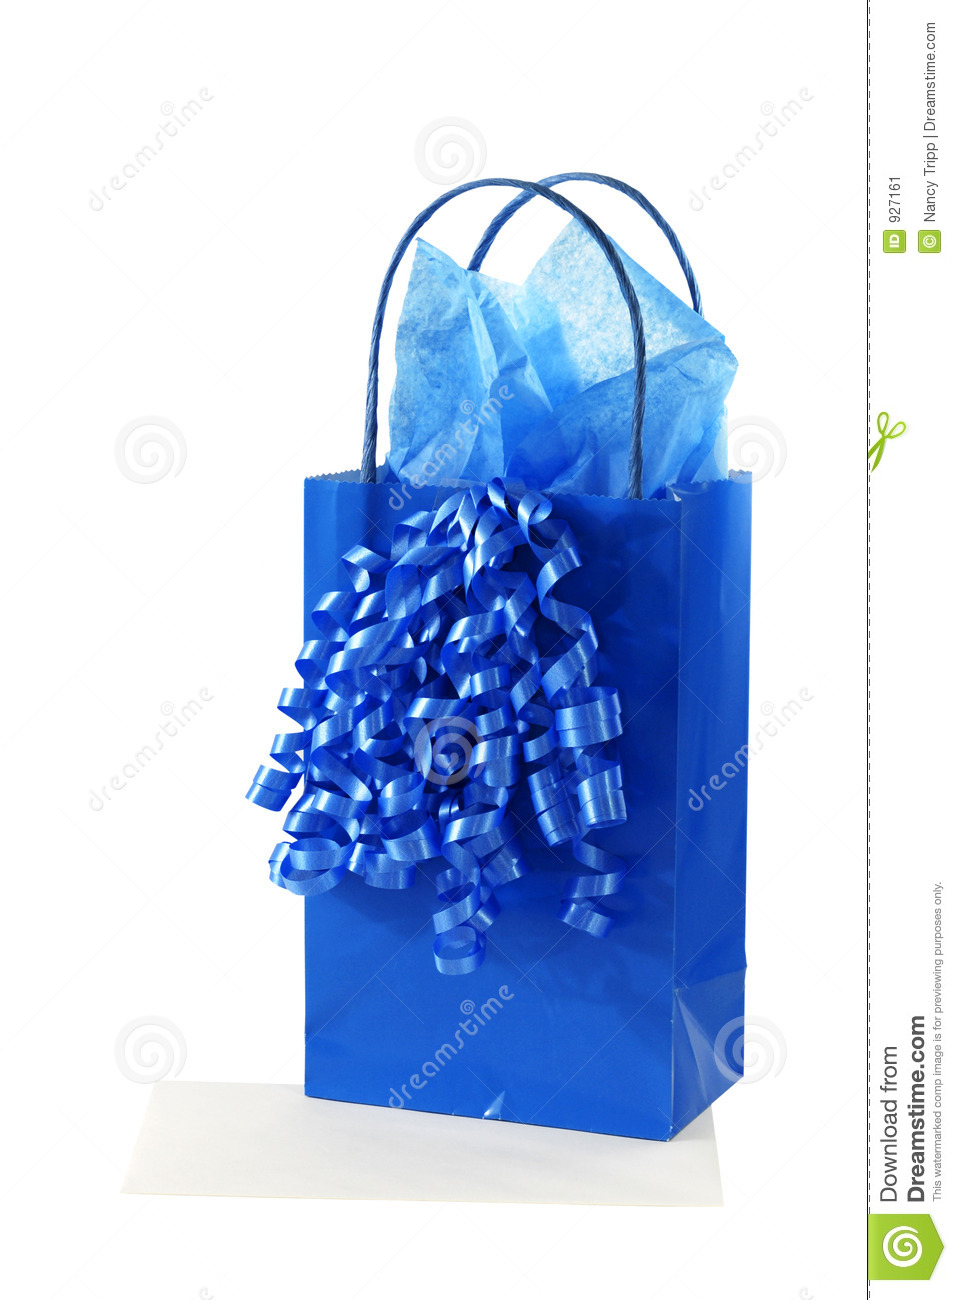 Gift Bag With Tissue Paper And Ribbon Stock Image   Image  927161